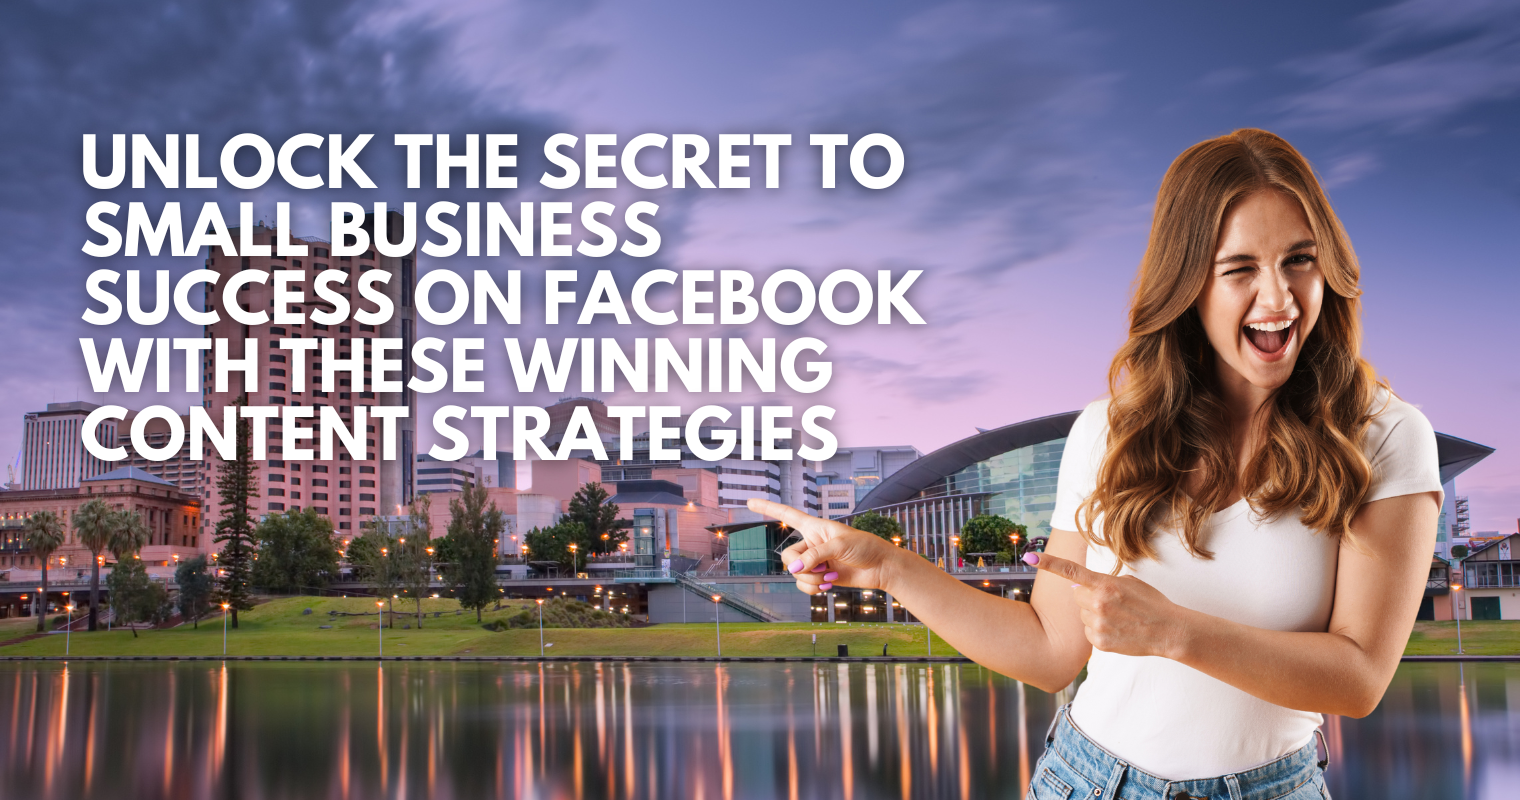 Unlock the Secret to Small Business Success on Facebook with These Winning Content Strategies